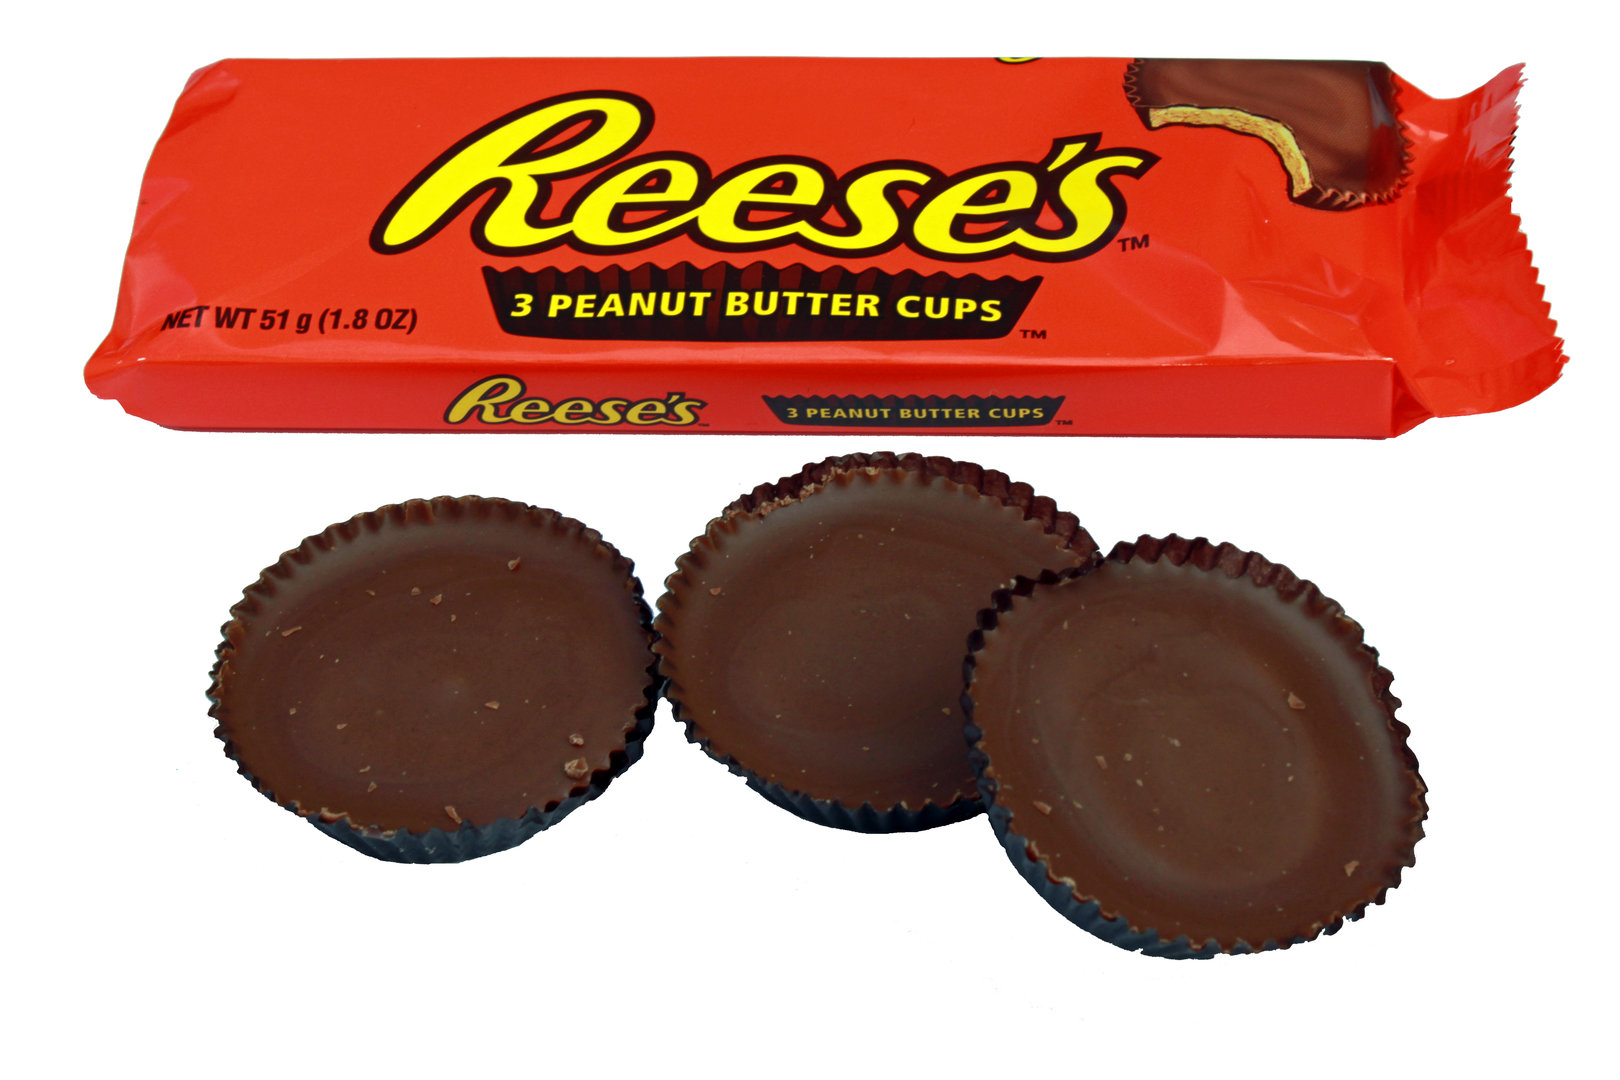 Hershey's Reese's Peanut Butter Cups, 51g - Piece of UK